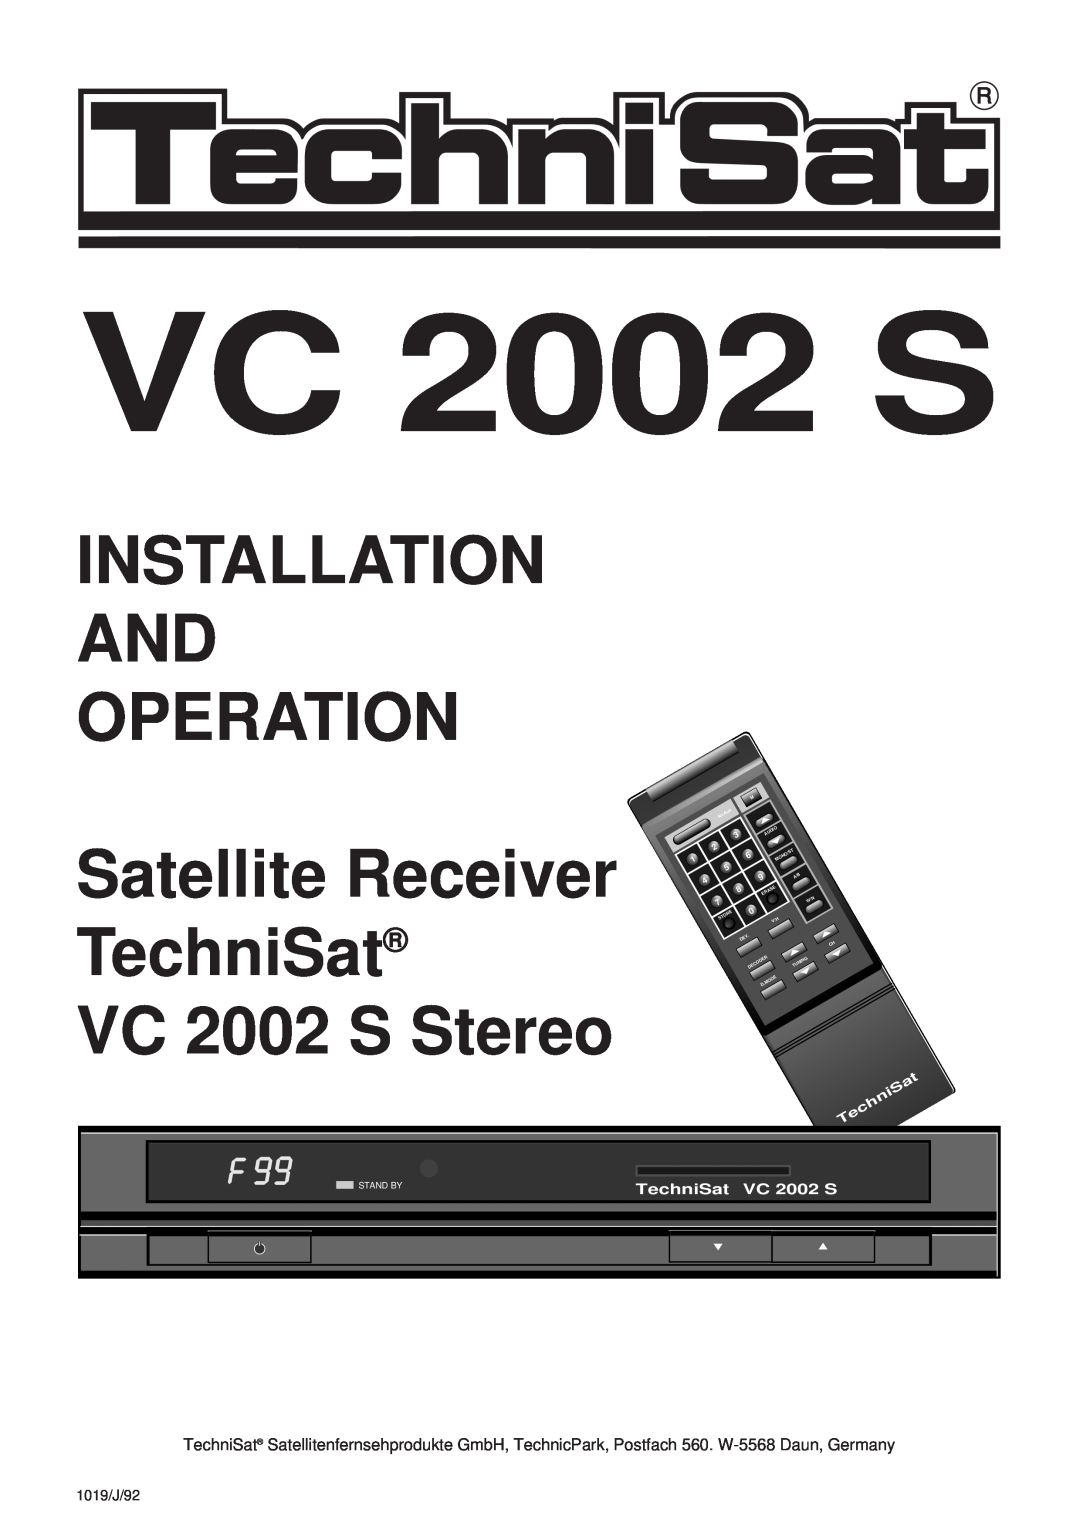 TechniSat manual INSTALLATION AND OPERATION Satellite Receiver, TechniSat VC 2002 S Stereo, Stand By 